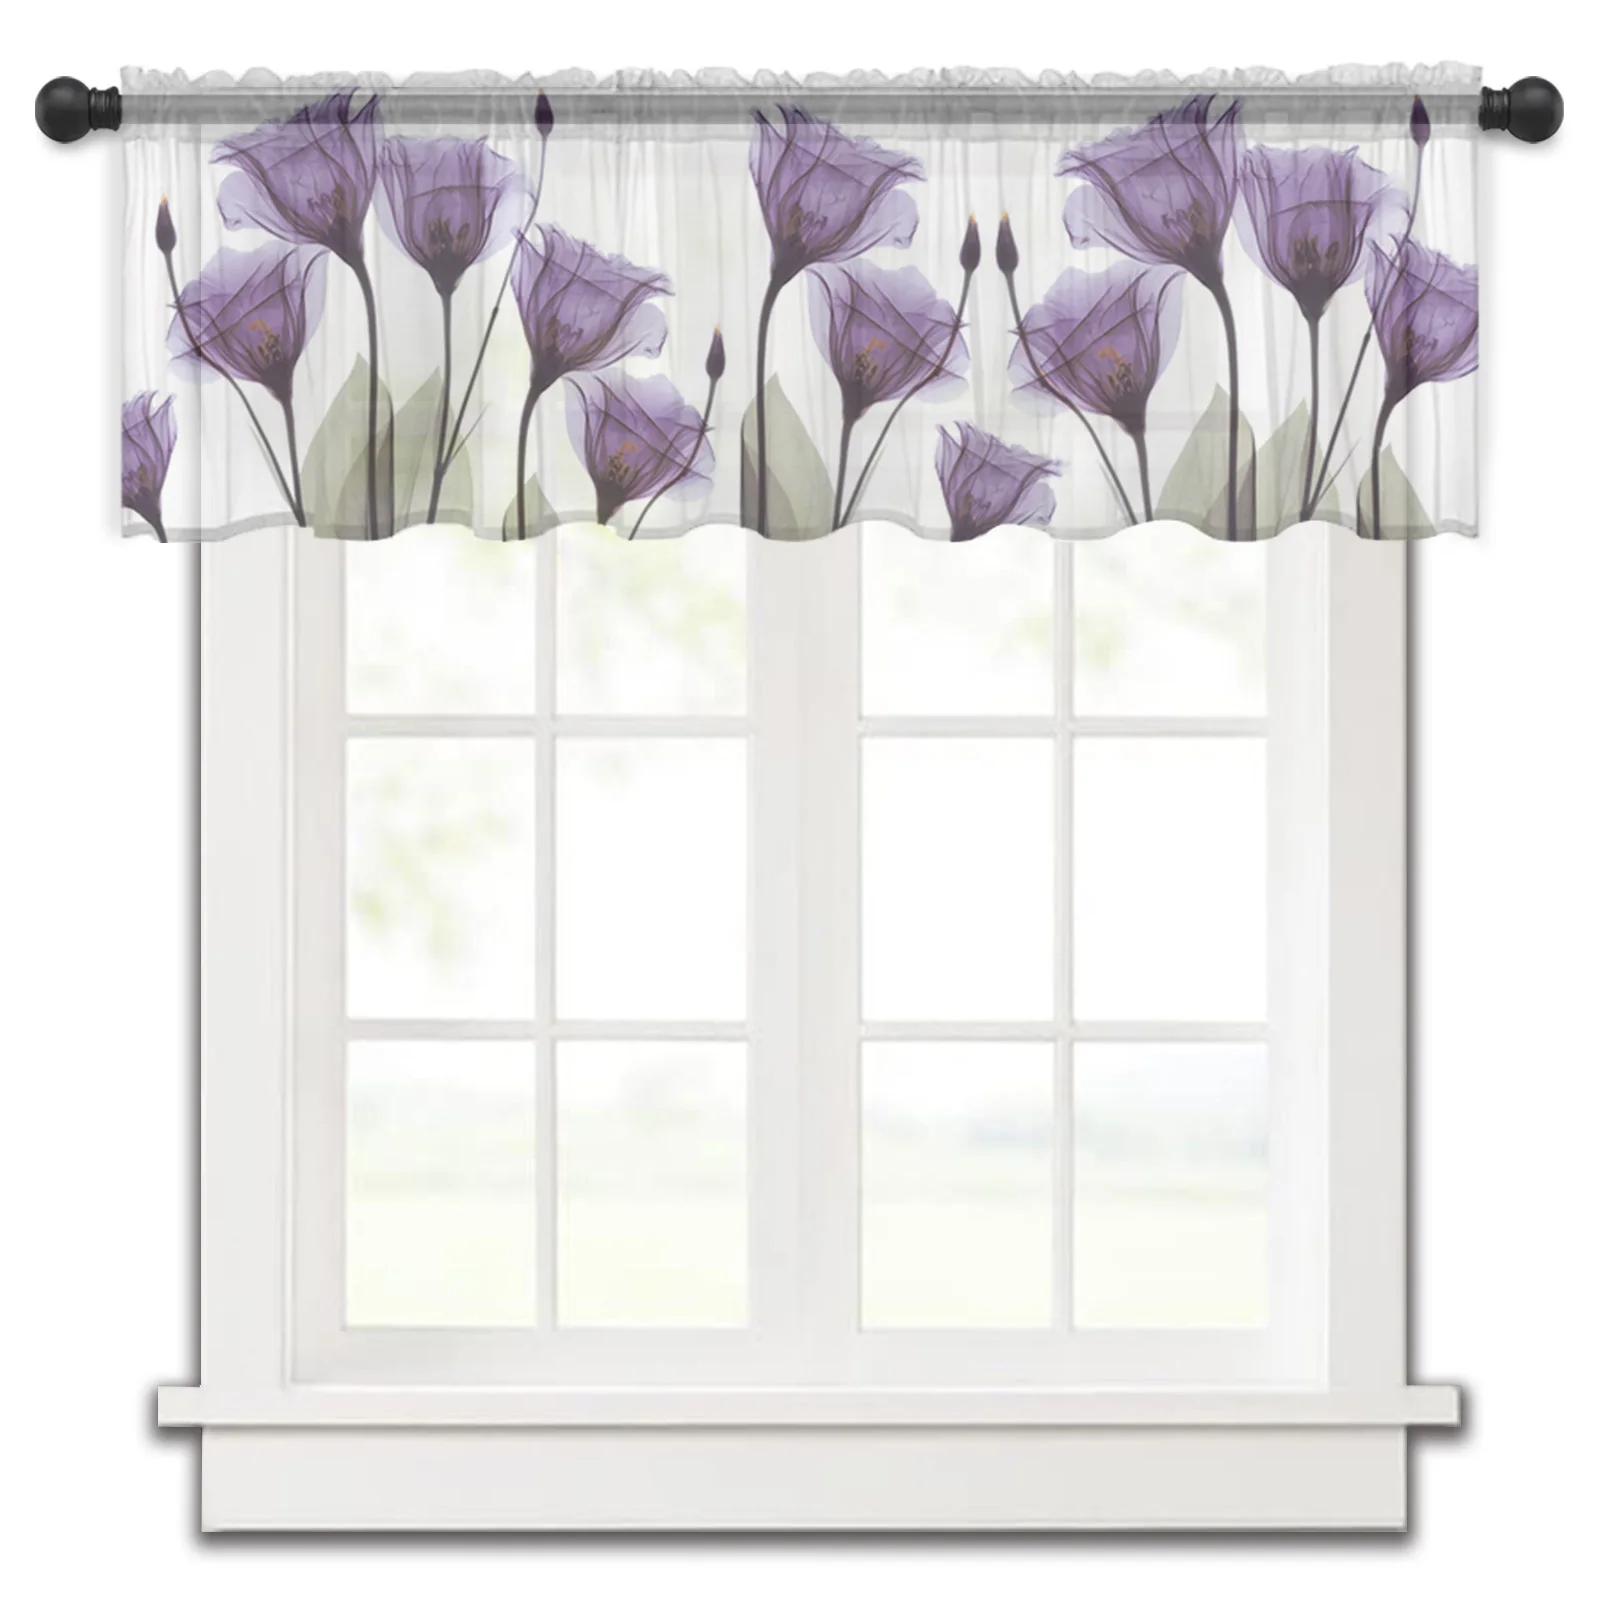 

Flower Summer Idyllic Purple Tulip Kitchen Small Curtain Tulle Sheer Short Curtain Bedroom Living Room Home Decor Voile Drapes